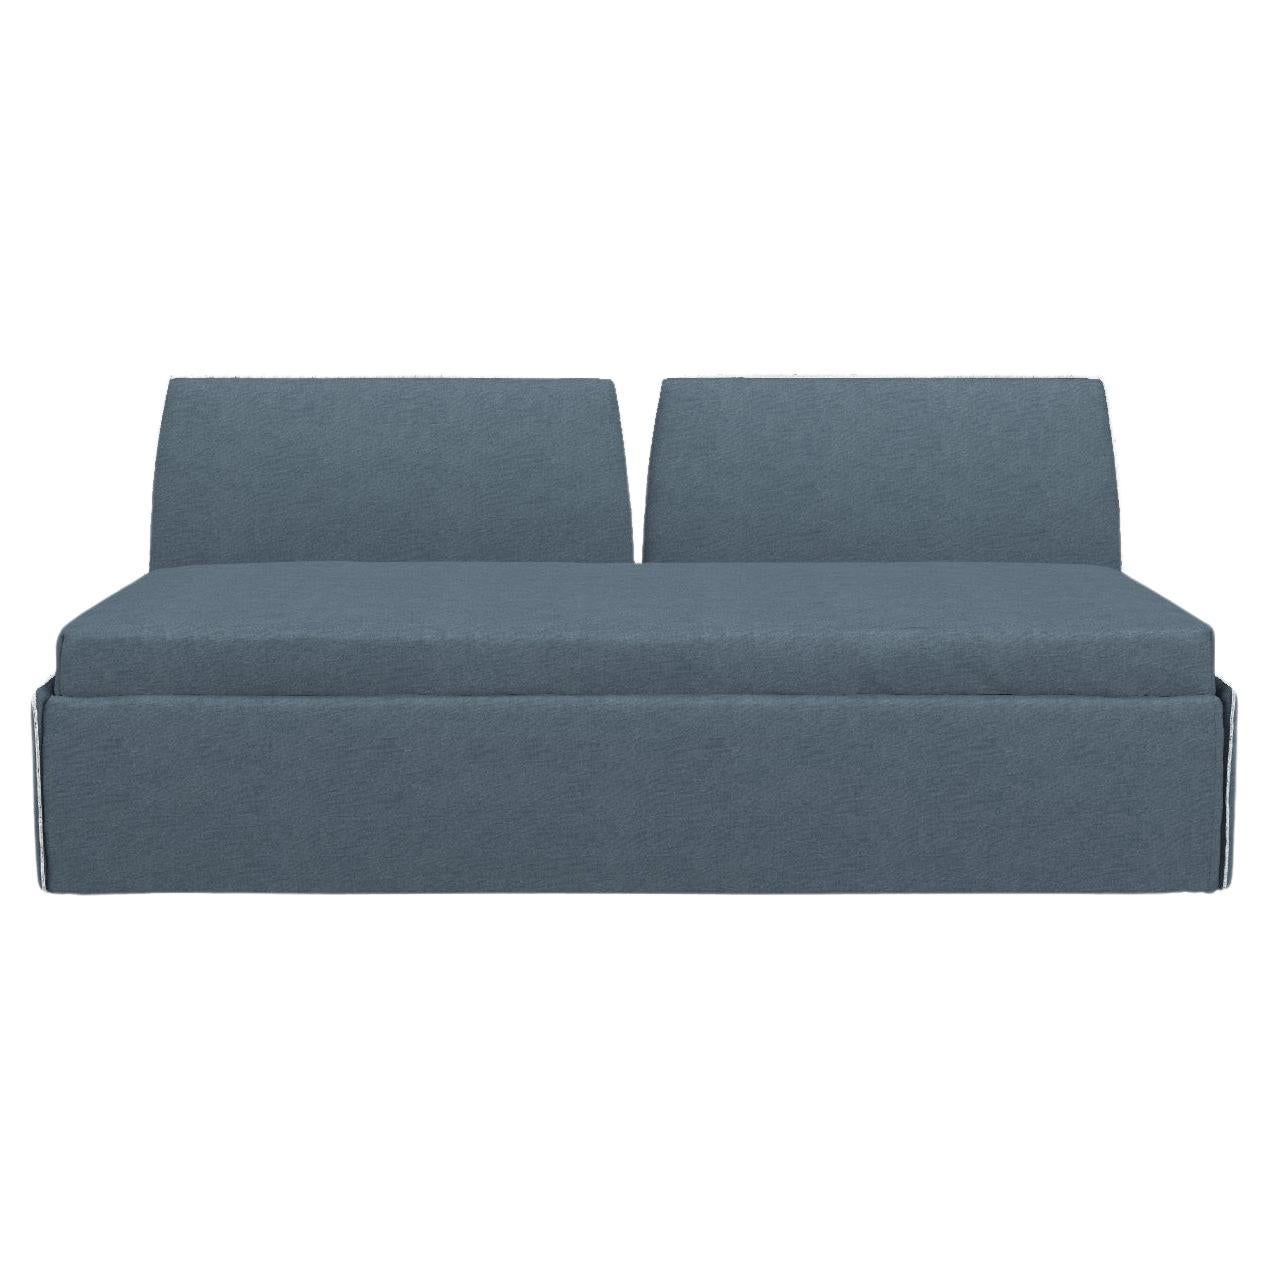 Gervasoni Open 5 Large Modular Bed Sofa in Munch Upholstery by Paola Navone For Sale